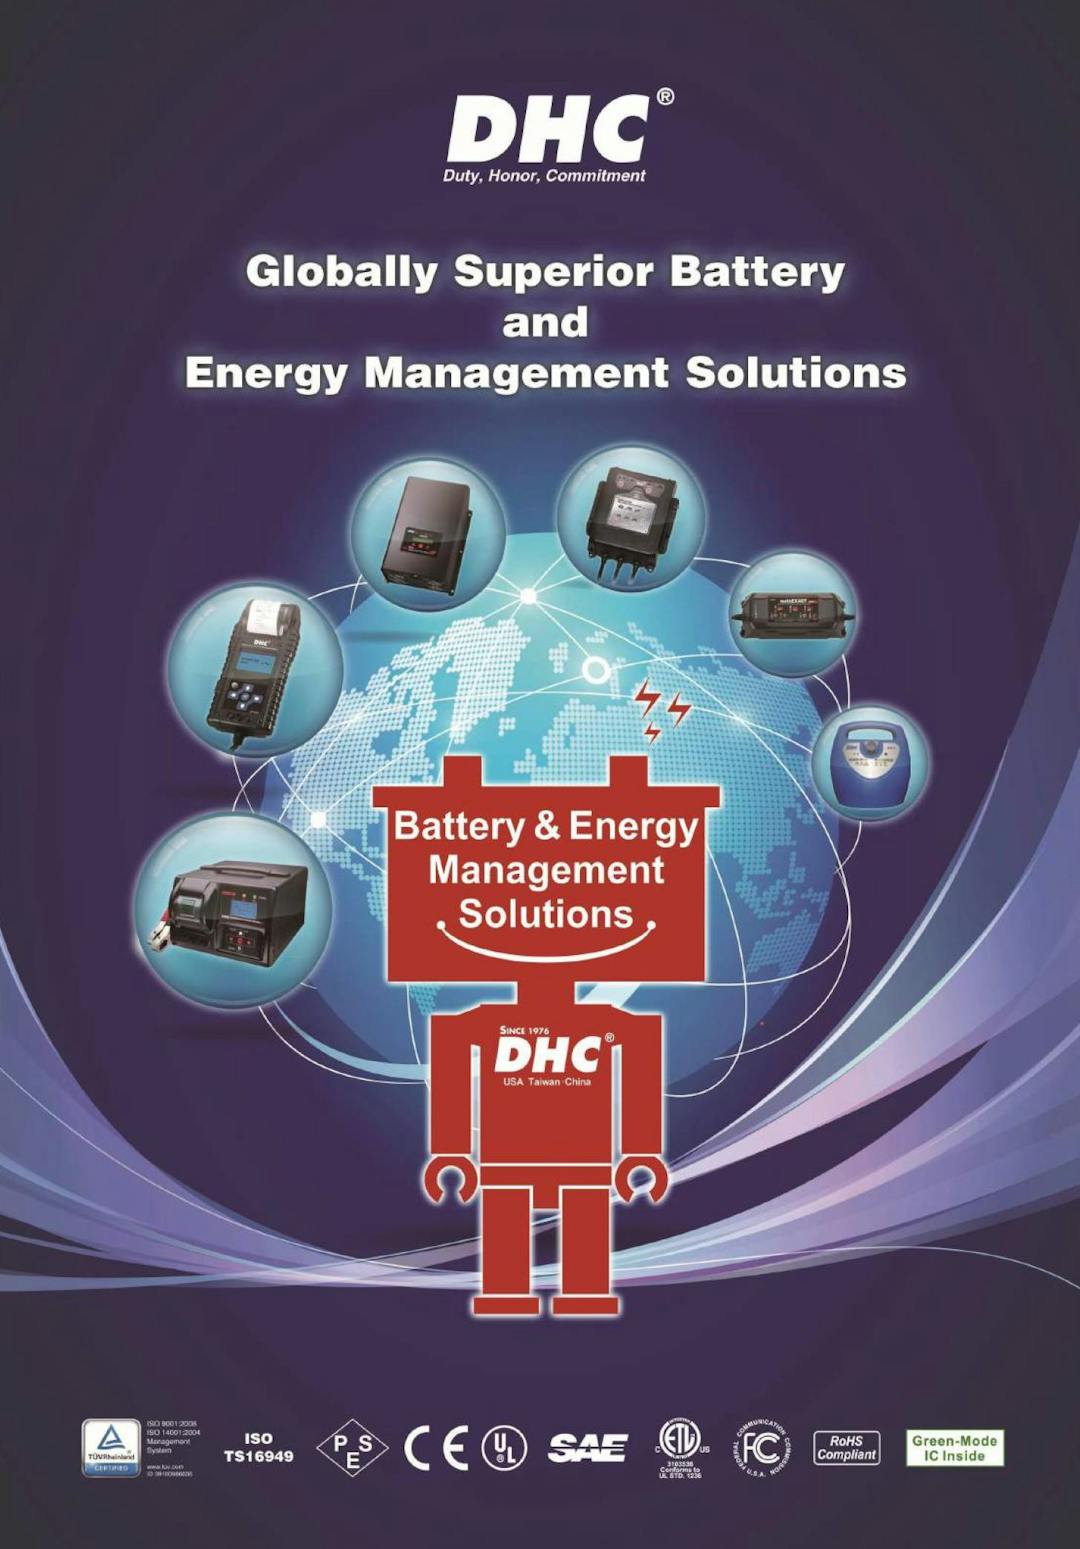 DHC 60888 (125AMP) Digital Battery Load Tester and Charging System Analyzer